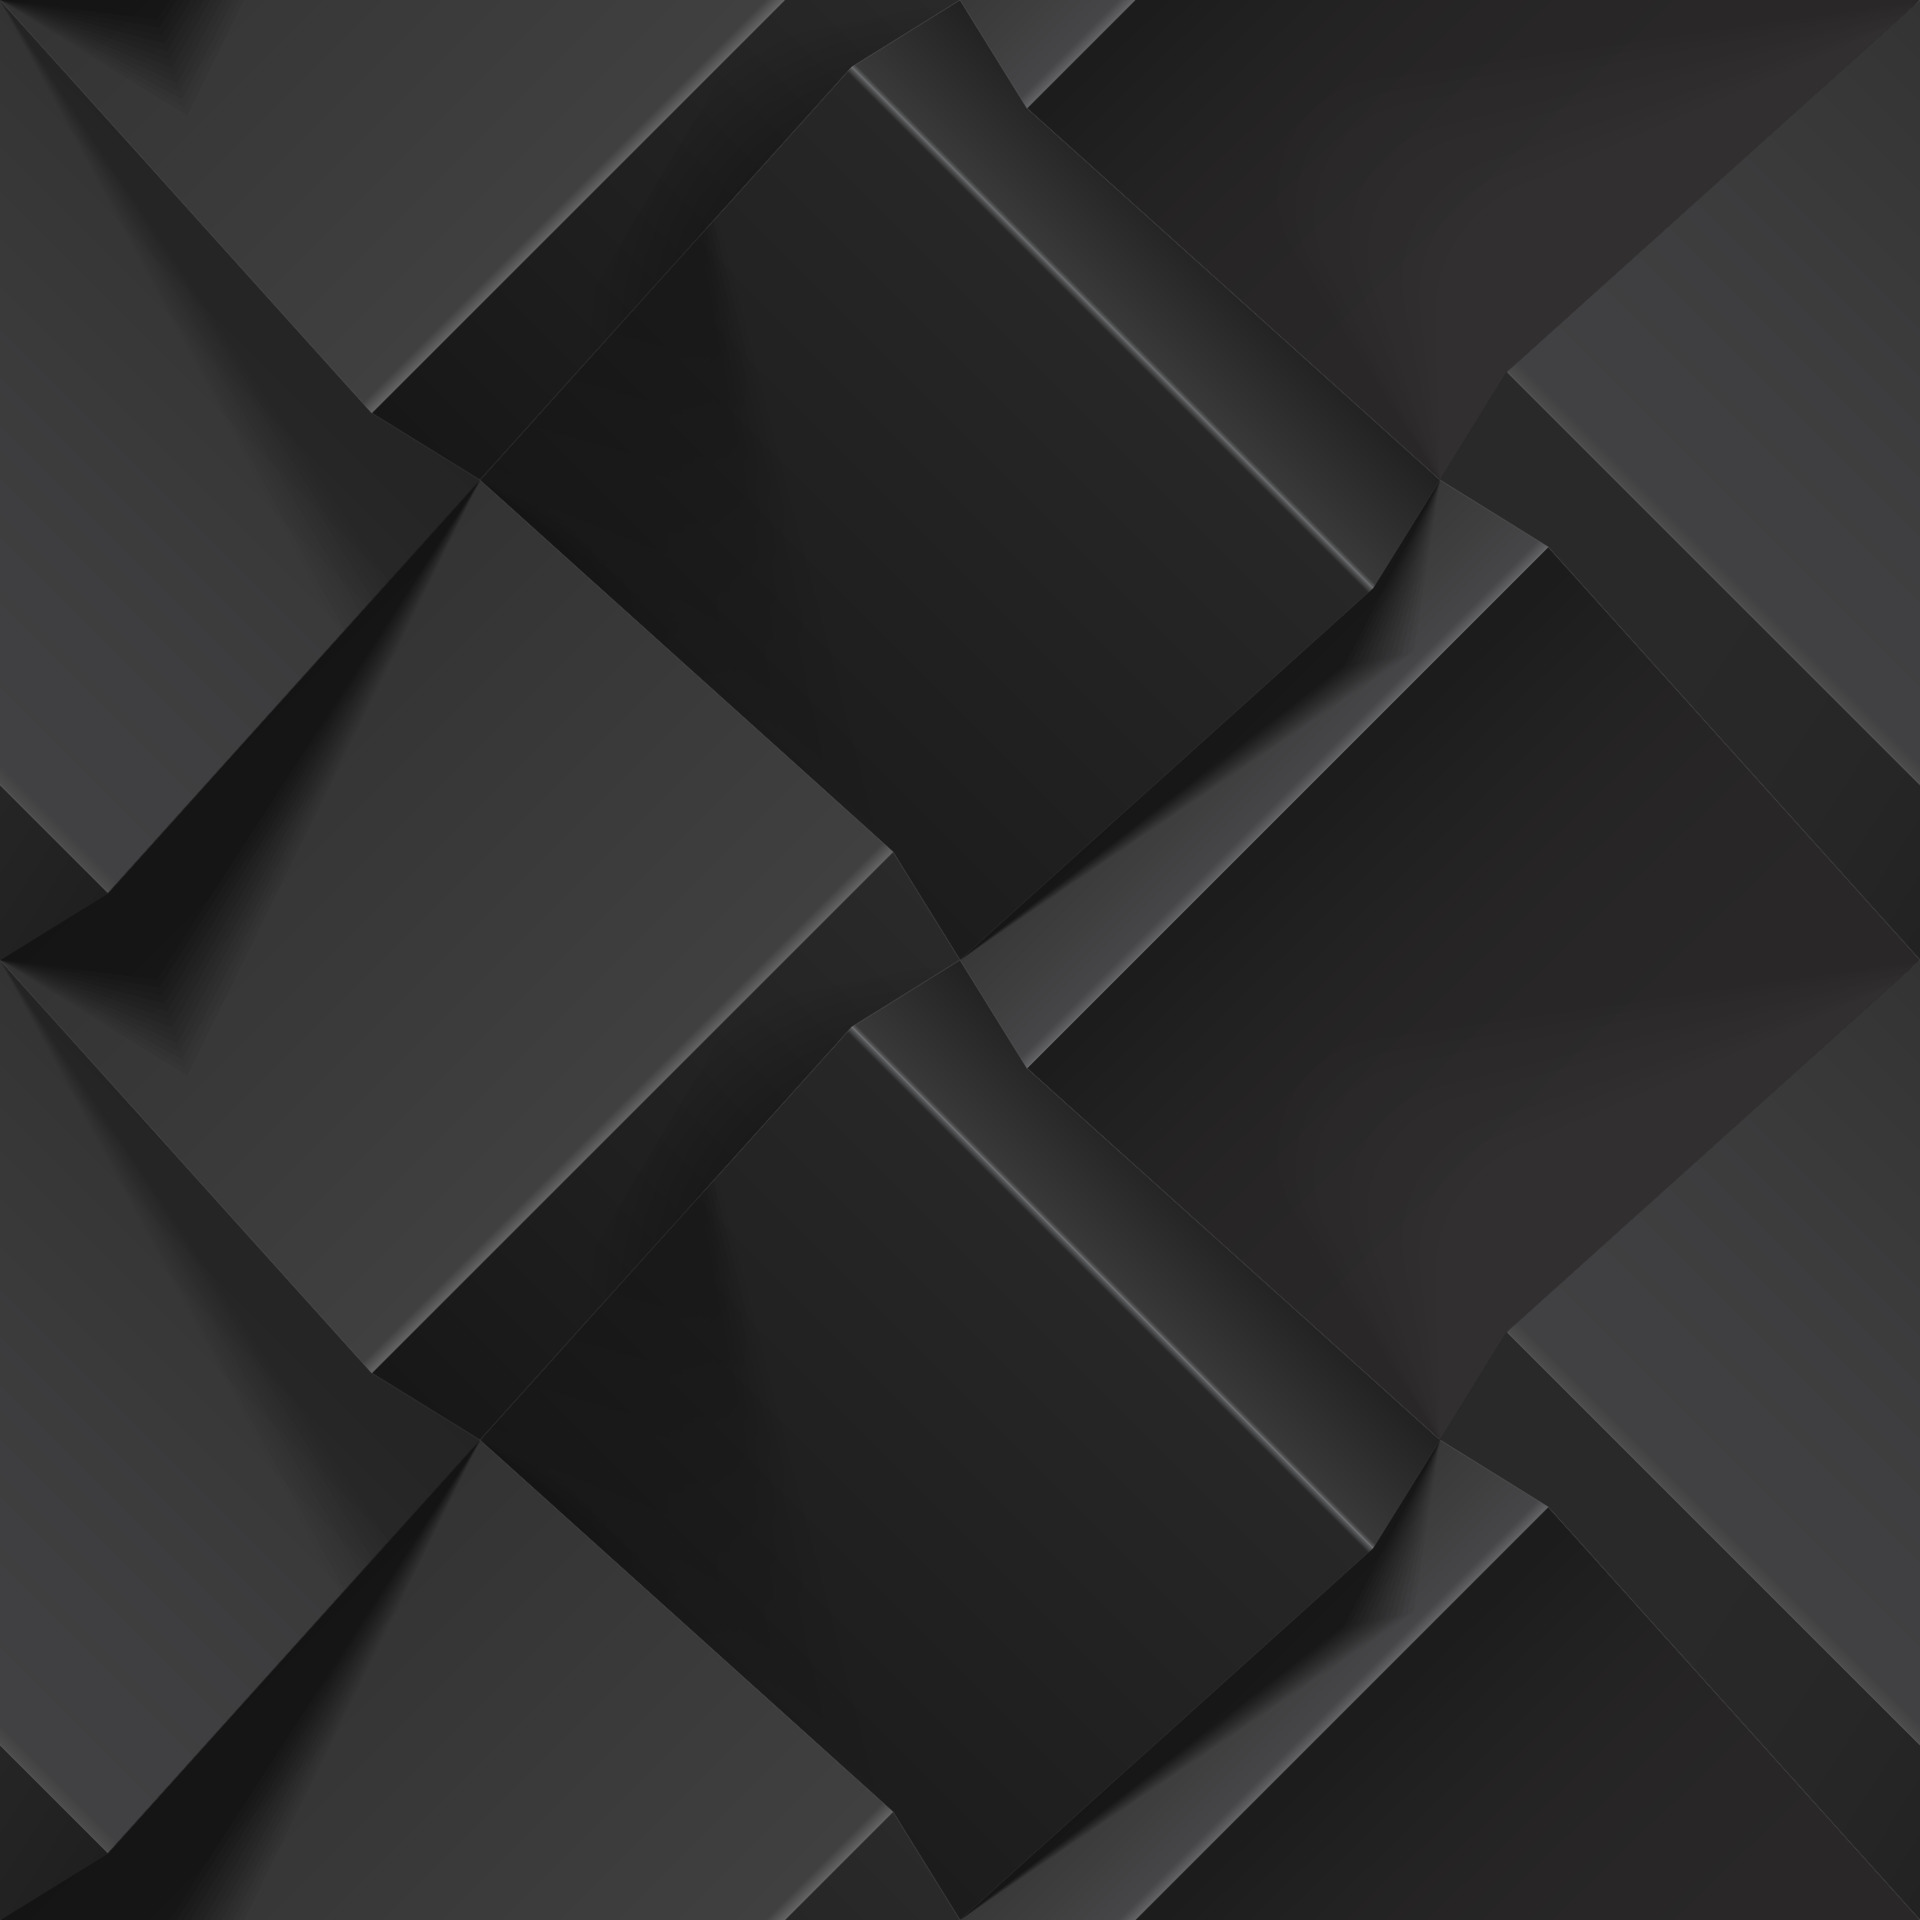 Dark abstract seamless geometric pattern. Realistic 3D cubes from black paper. Vector for wallpaper, textile, fabric, wrapping paper, background. Texture with volume extrude effect